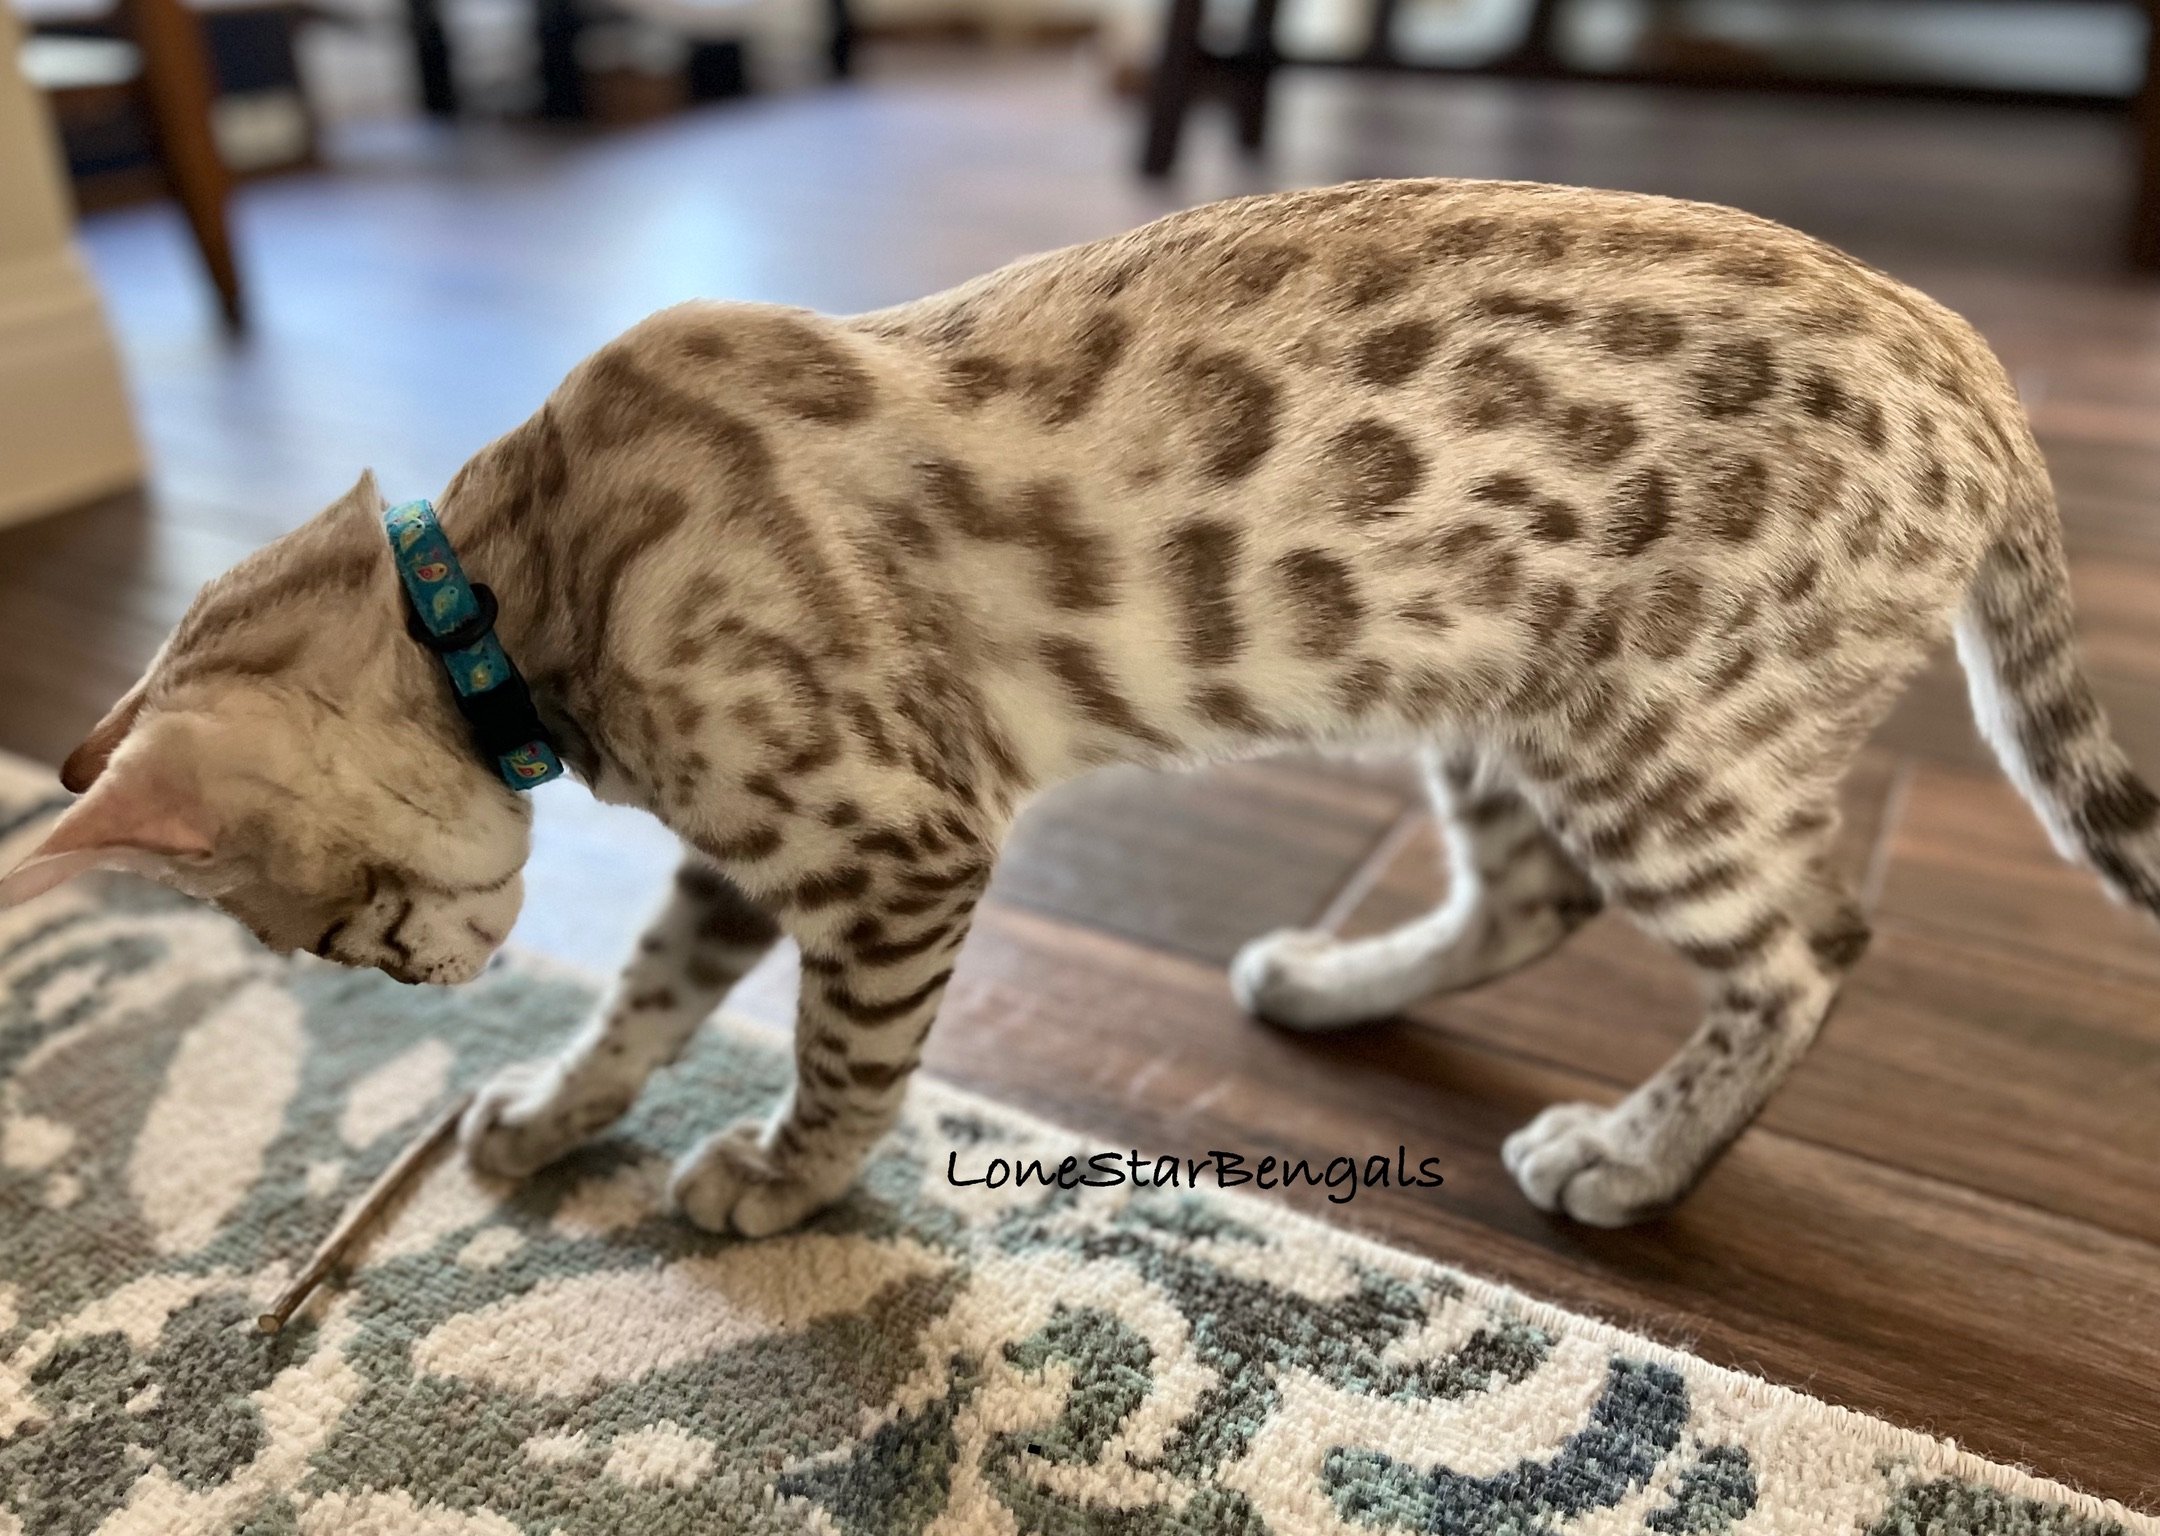 A Bengal cat from Lone Star Bengal Cats gracefully walks on a rug.